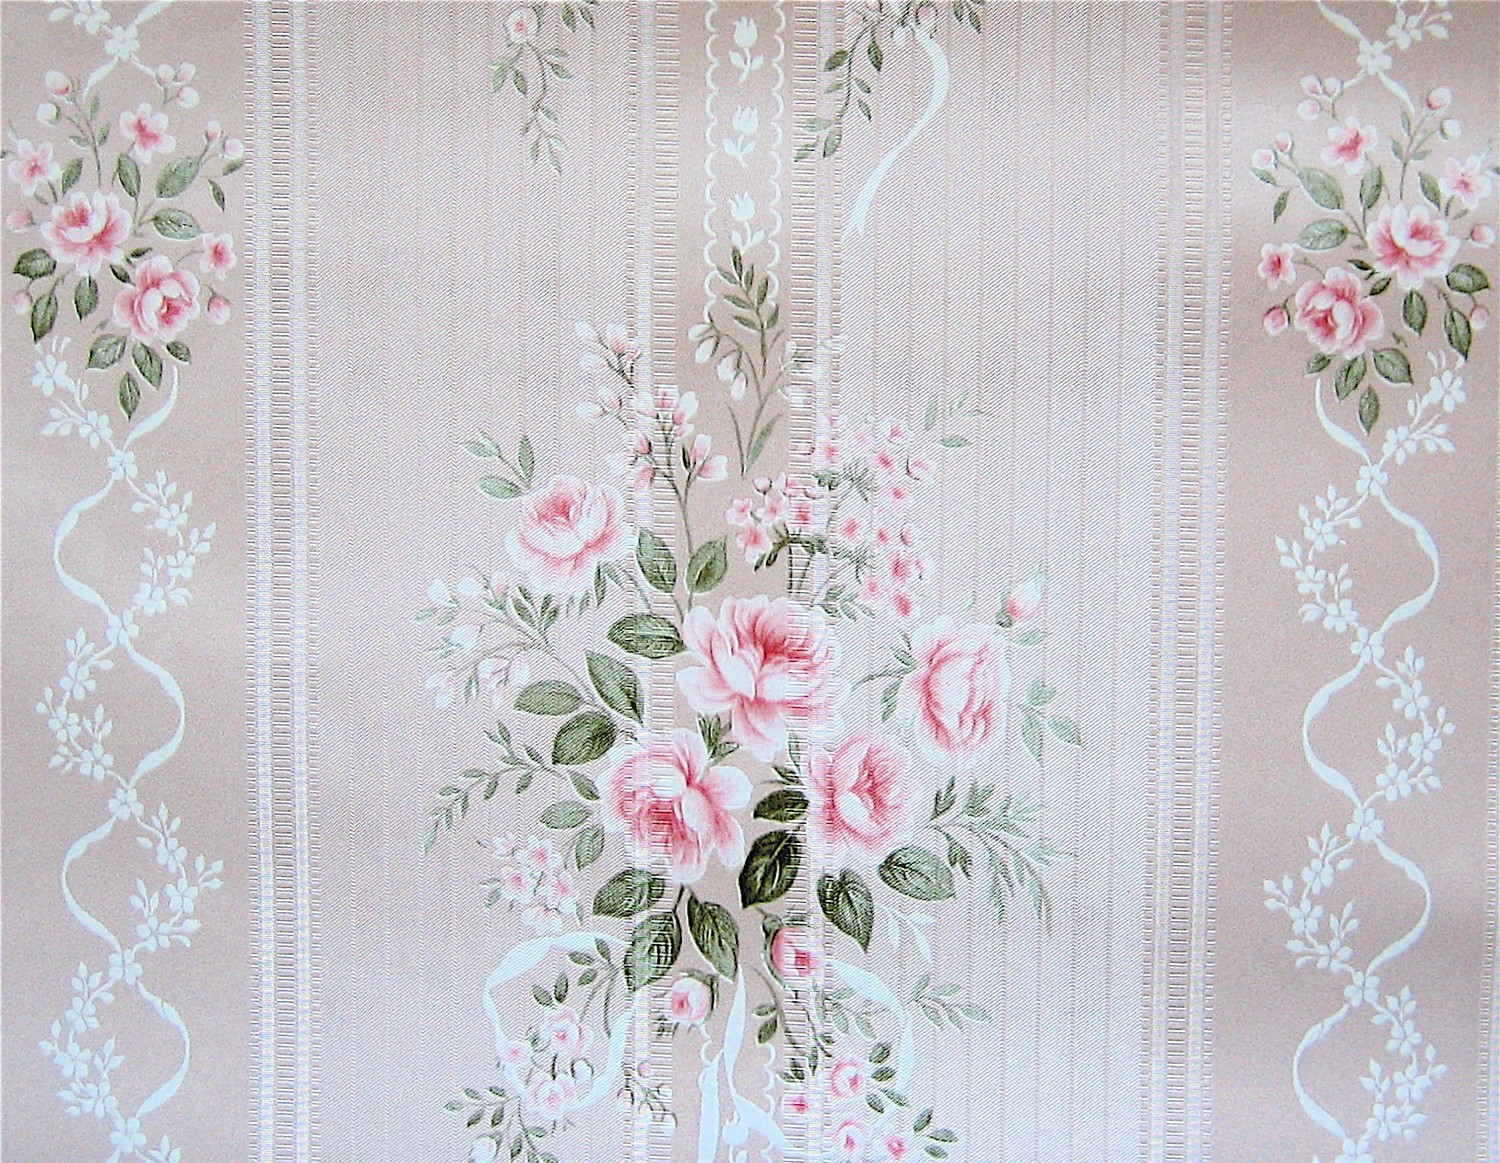 Shimmery Shabby Chic Vintage Wallpaper by becaruns on Etsy